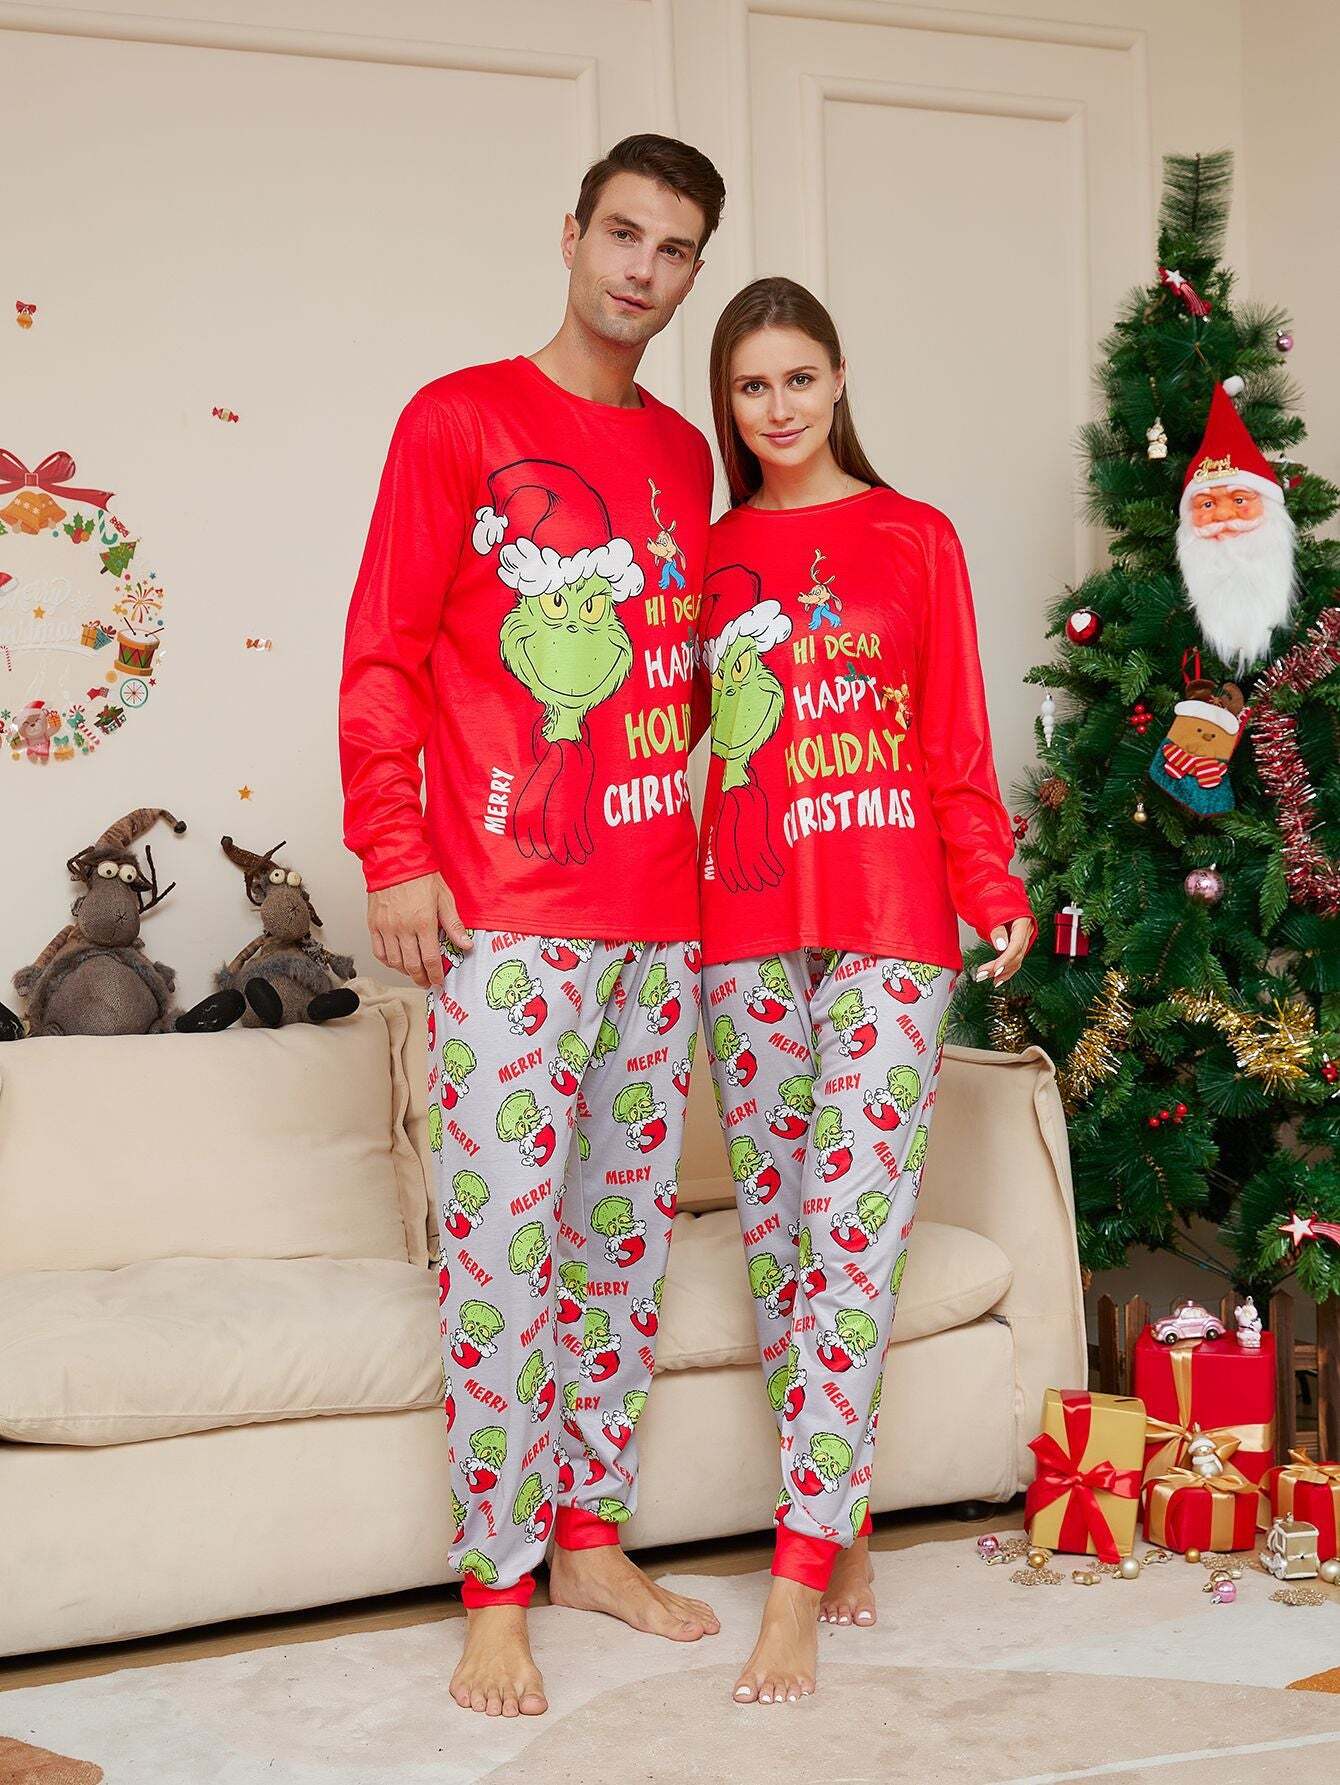 Classic Grinch Fmalily Matching Pajamas Sets (with Pet's clothes)